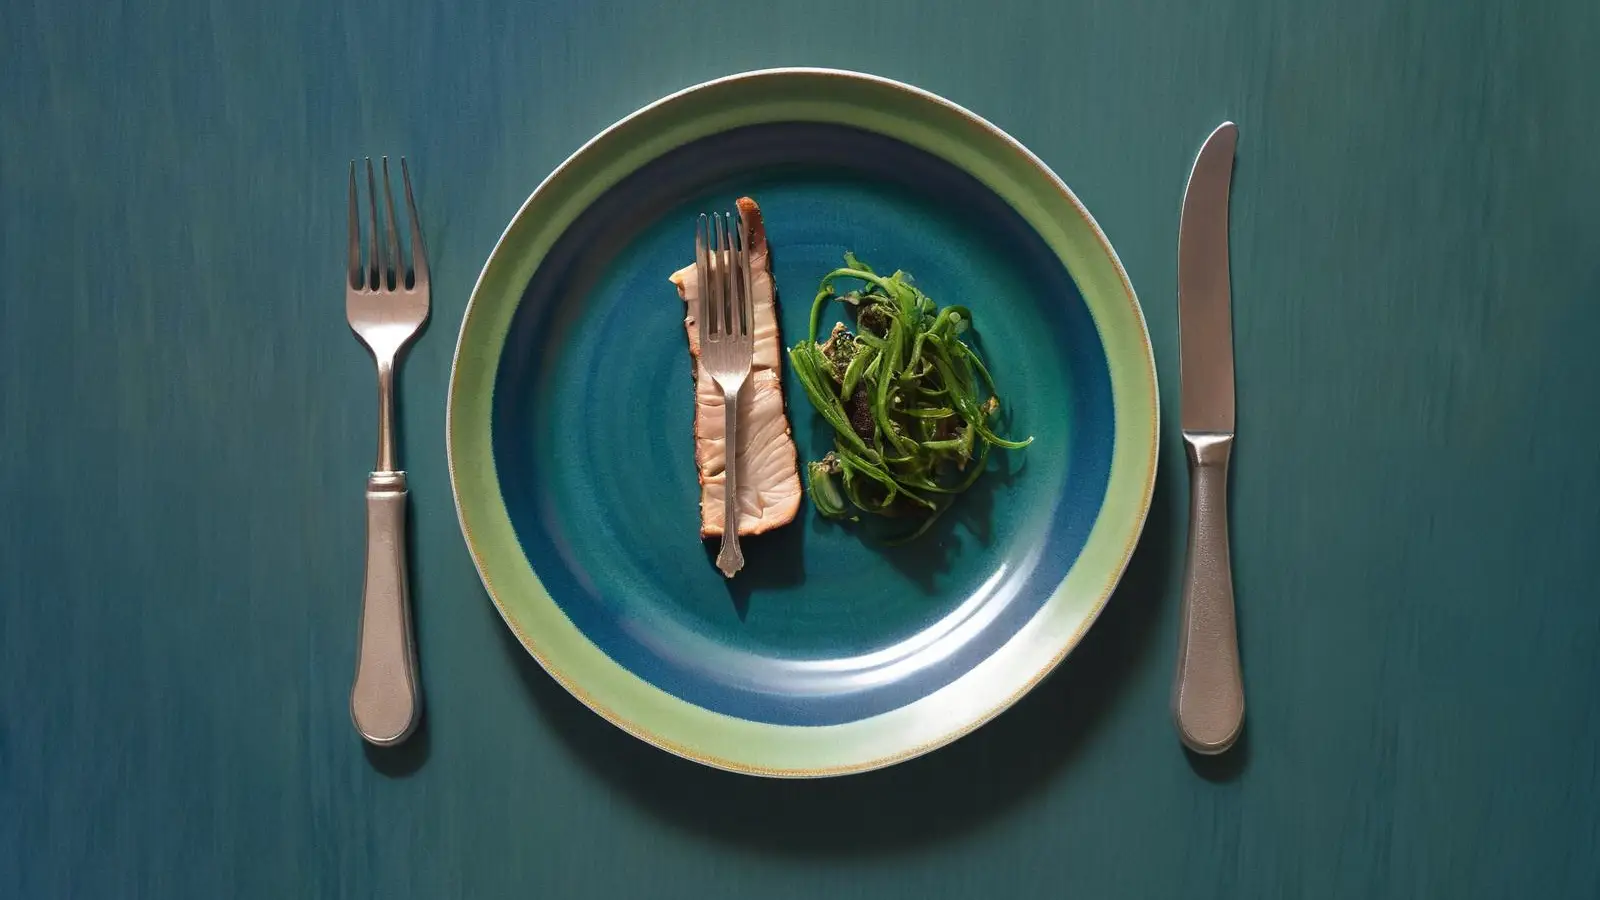 Tiny steak meal on a blue and green plate with a knife and fork on either side